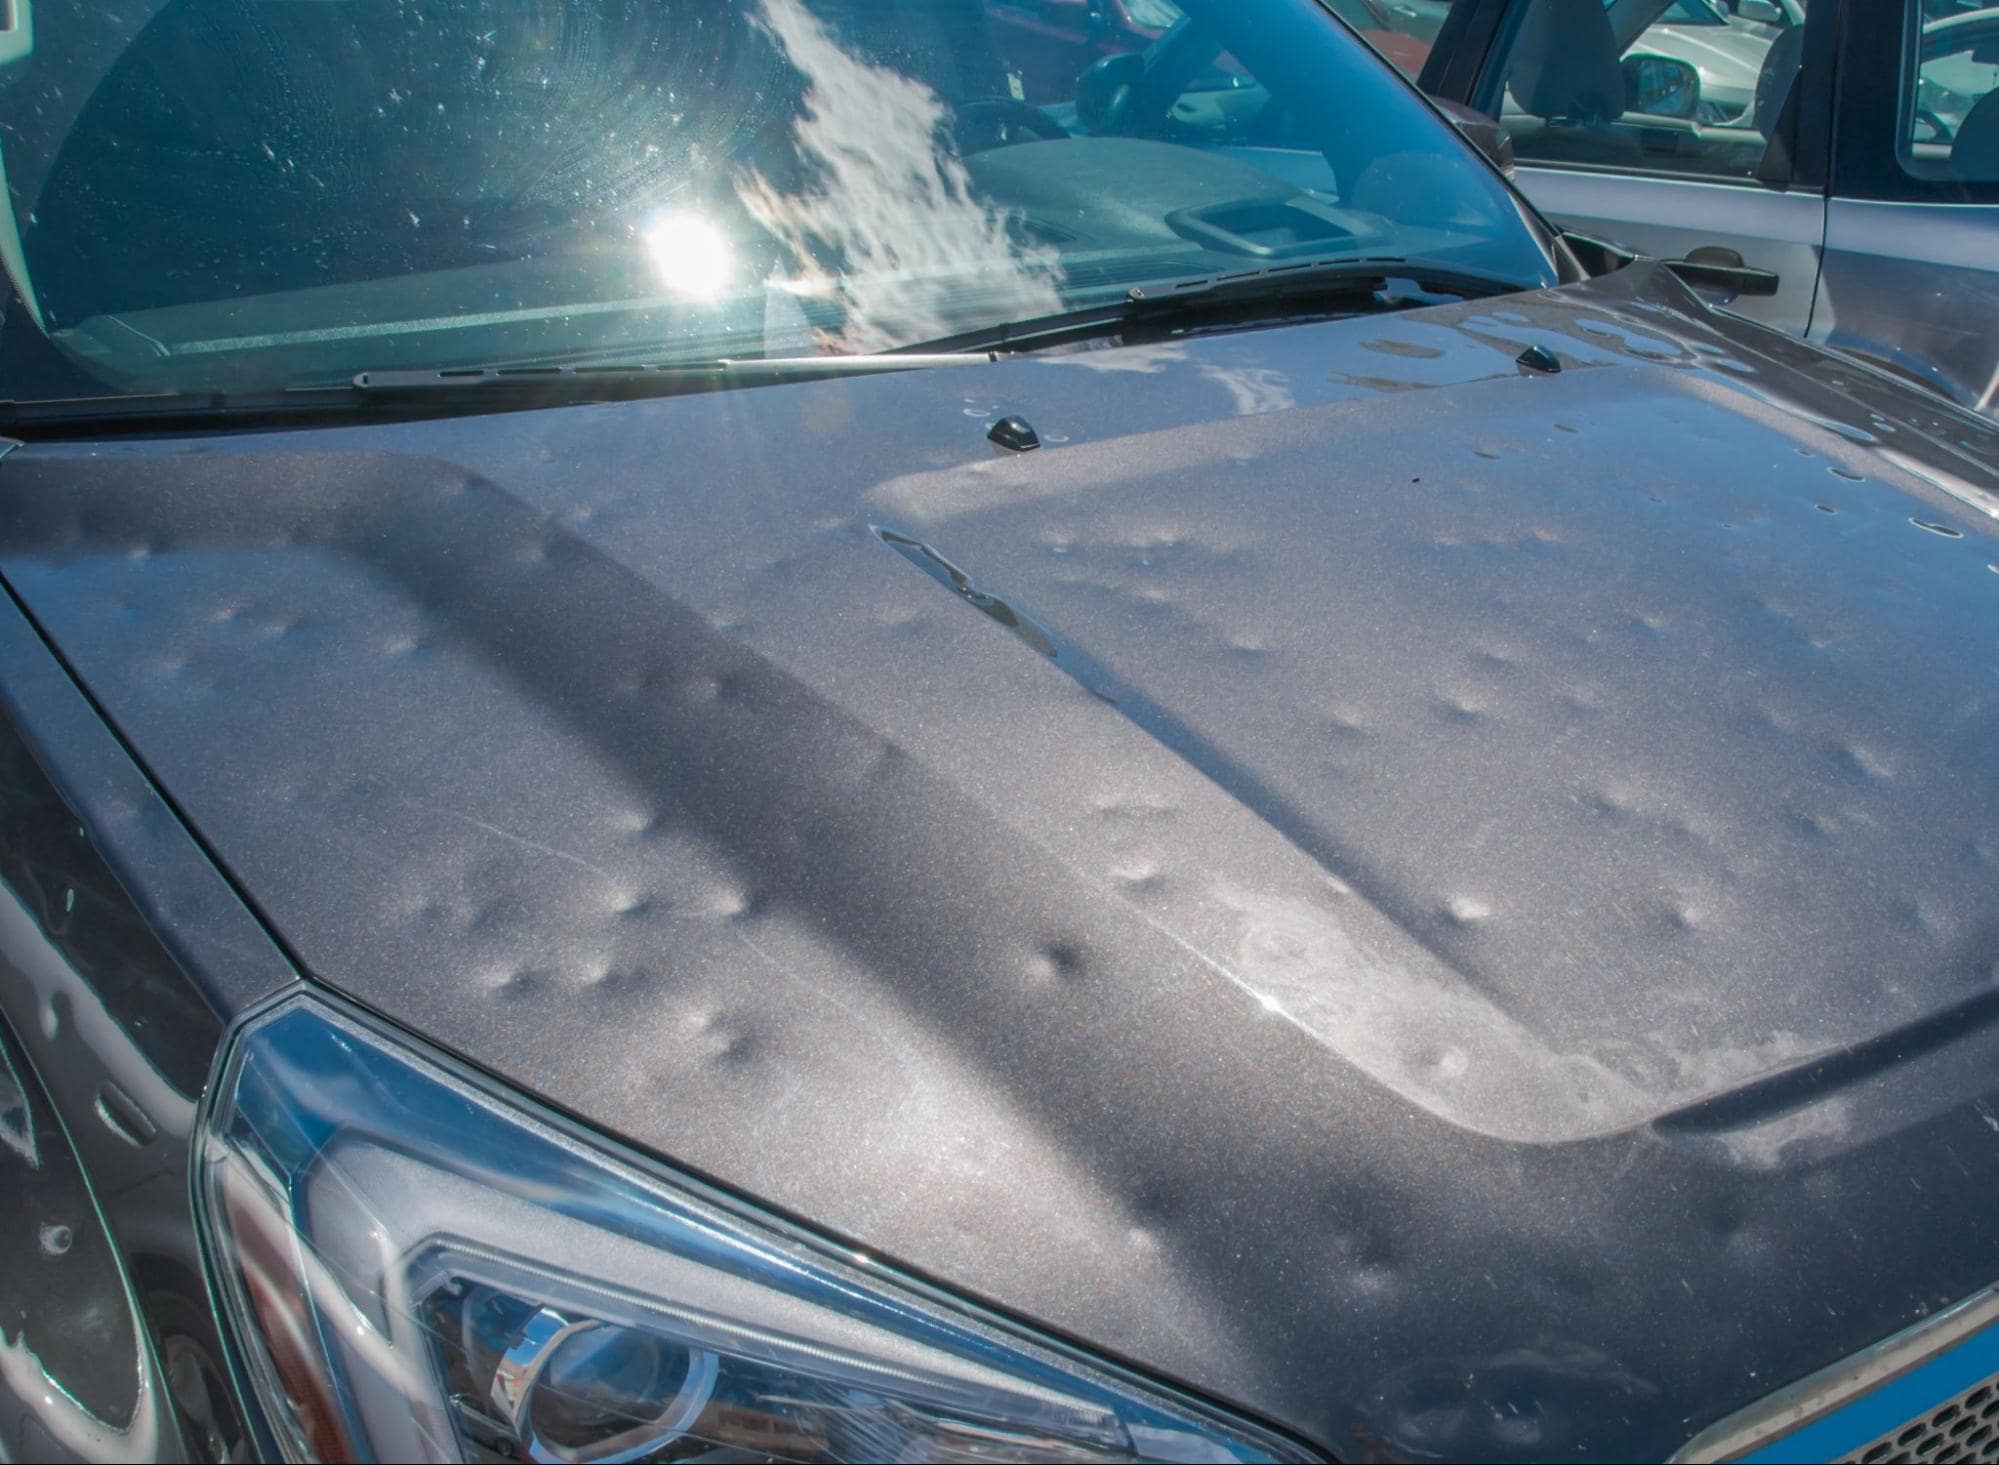 How To Get A Dent Out 7 DIY Methods for Removing Car & Truck Dents